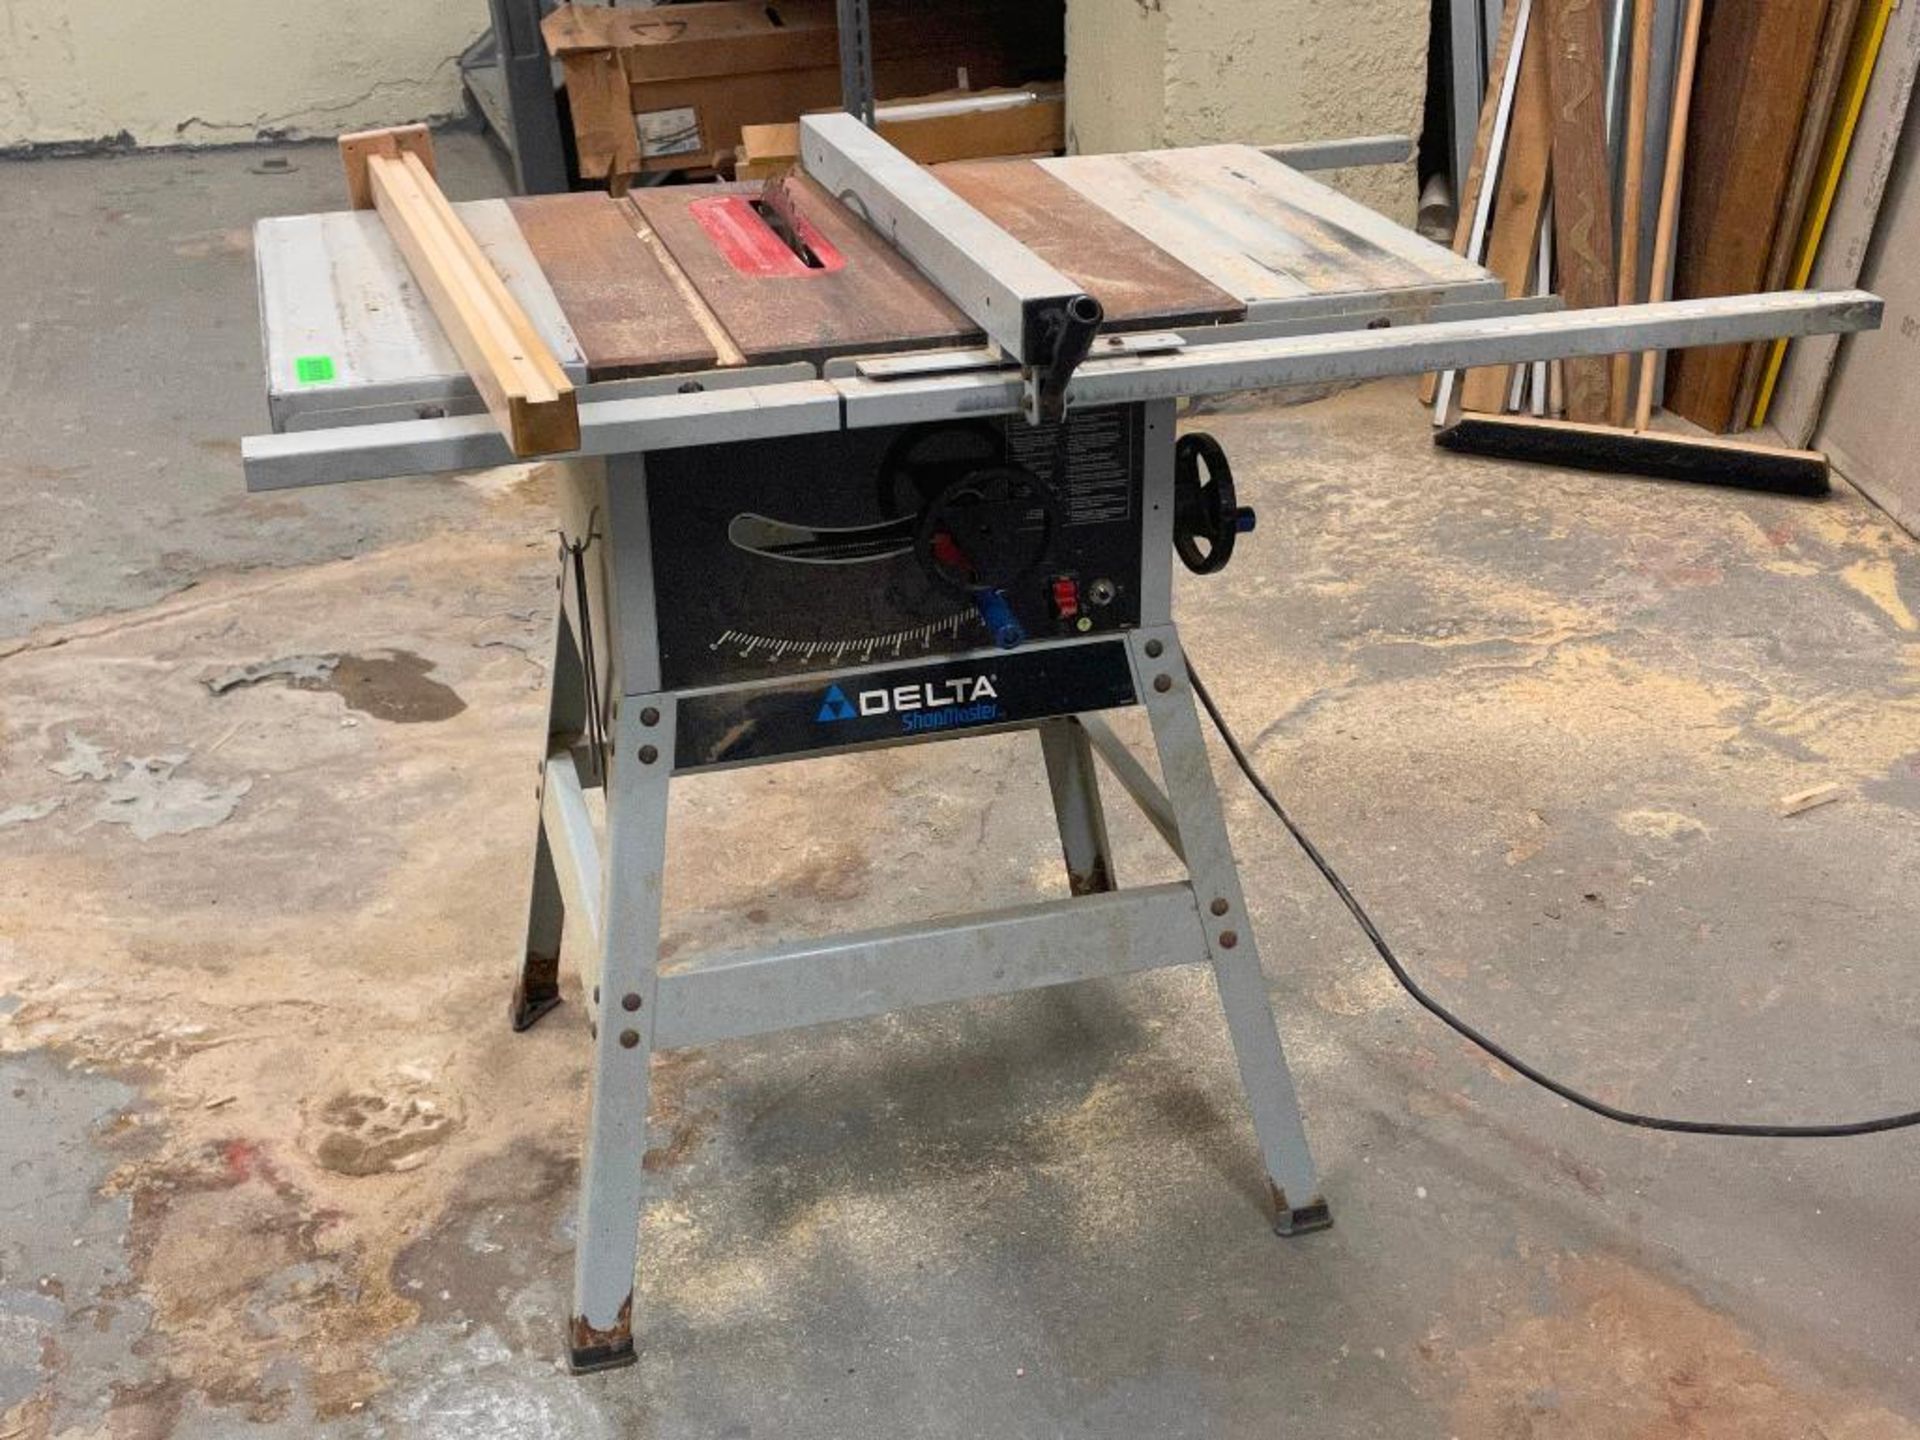 DESCRIPTION: 10" TABLE SAW BRAND / MODEL: DELTA ADDITIONAL INFORMATION: GREAT CONDITION. SEE PHOTOS.